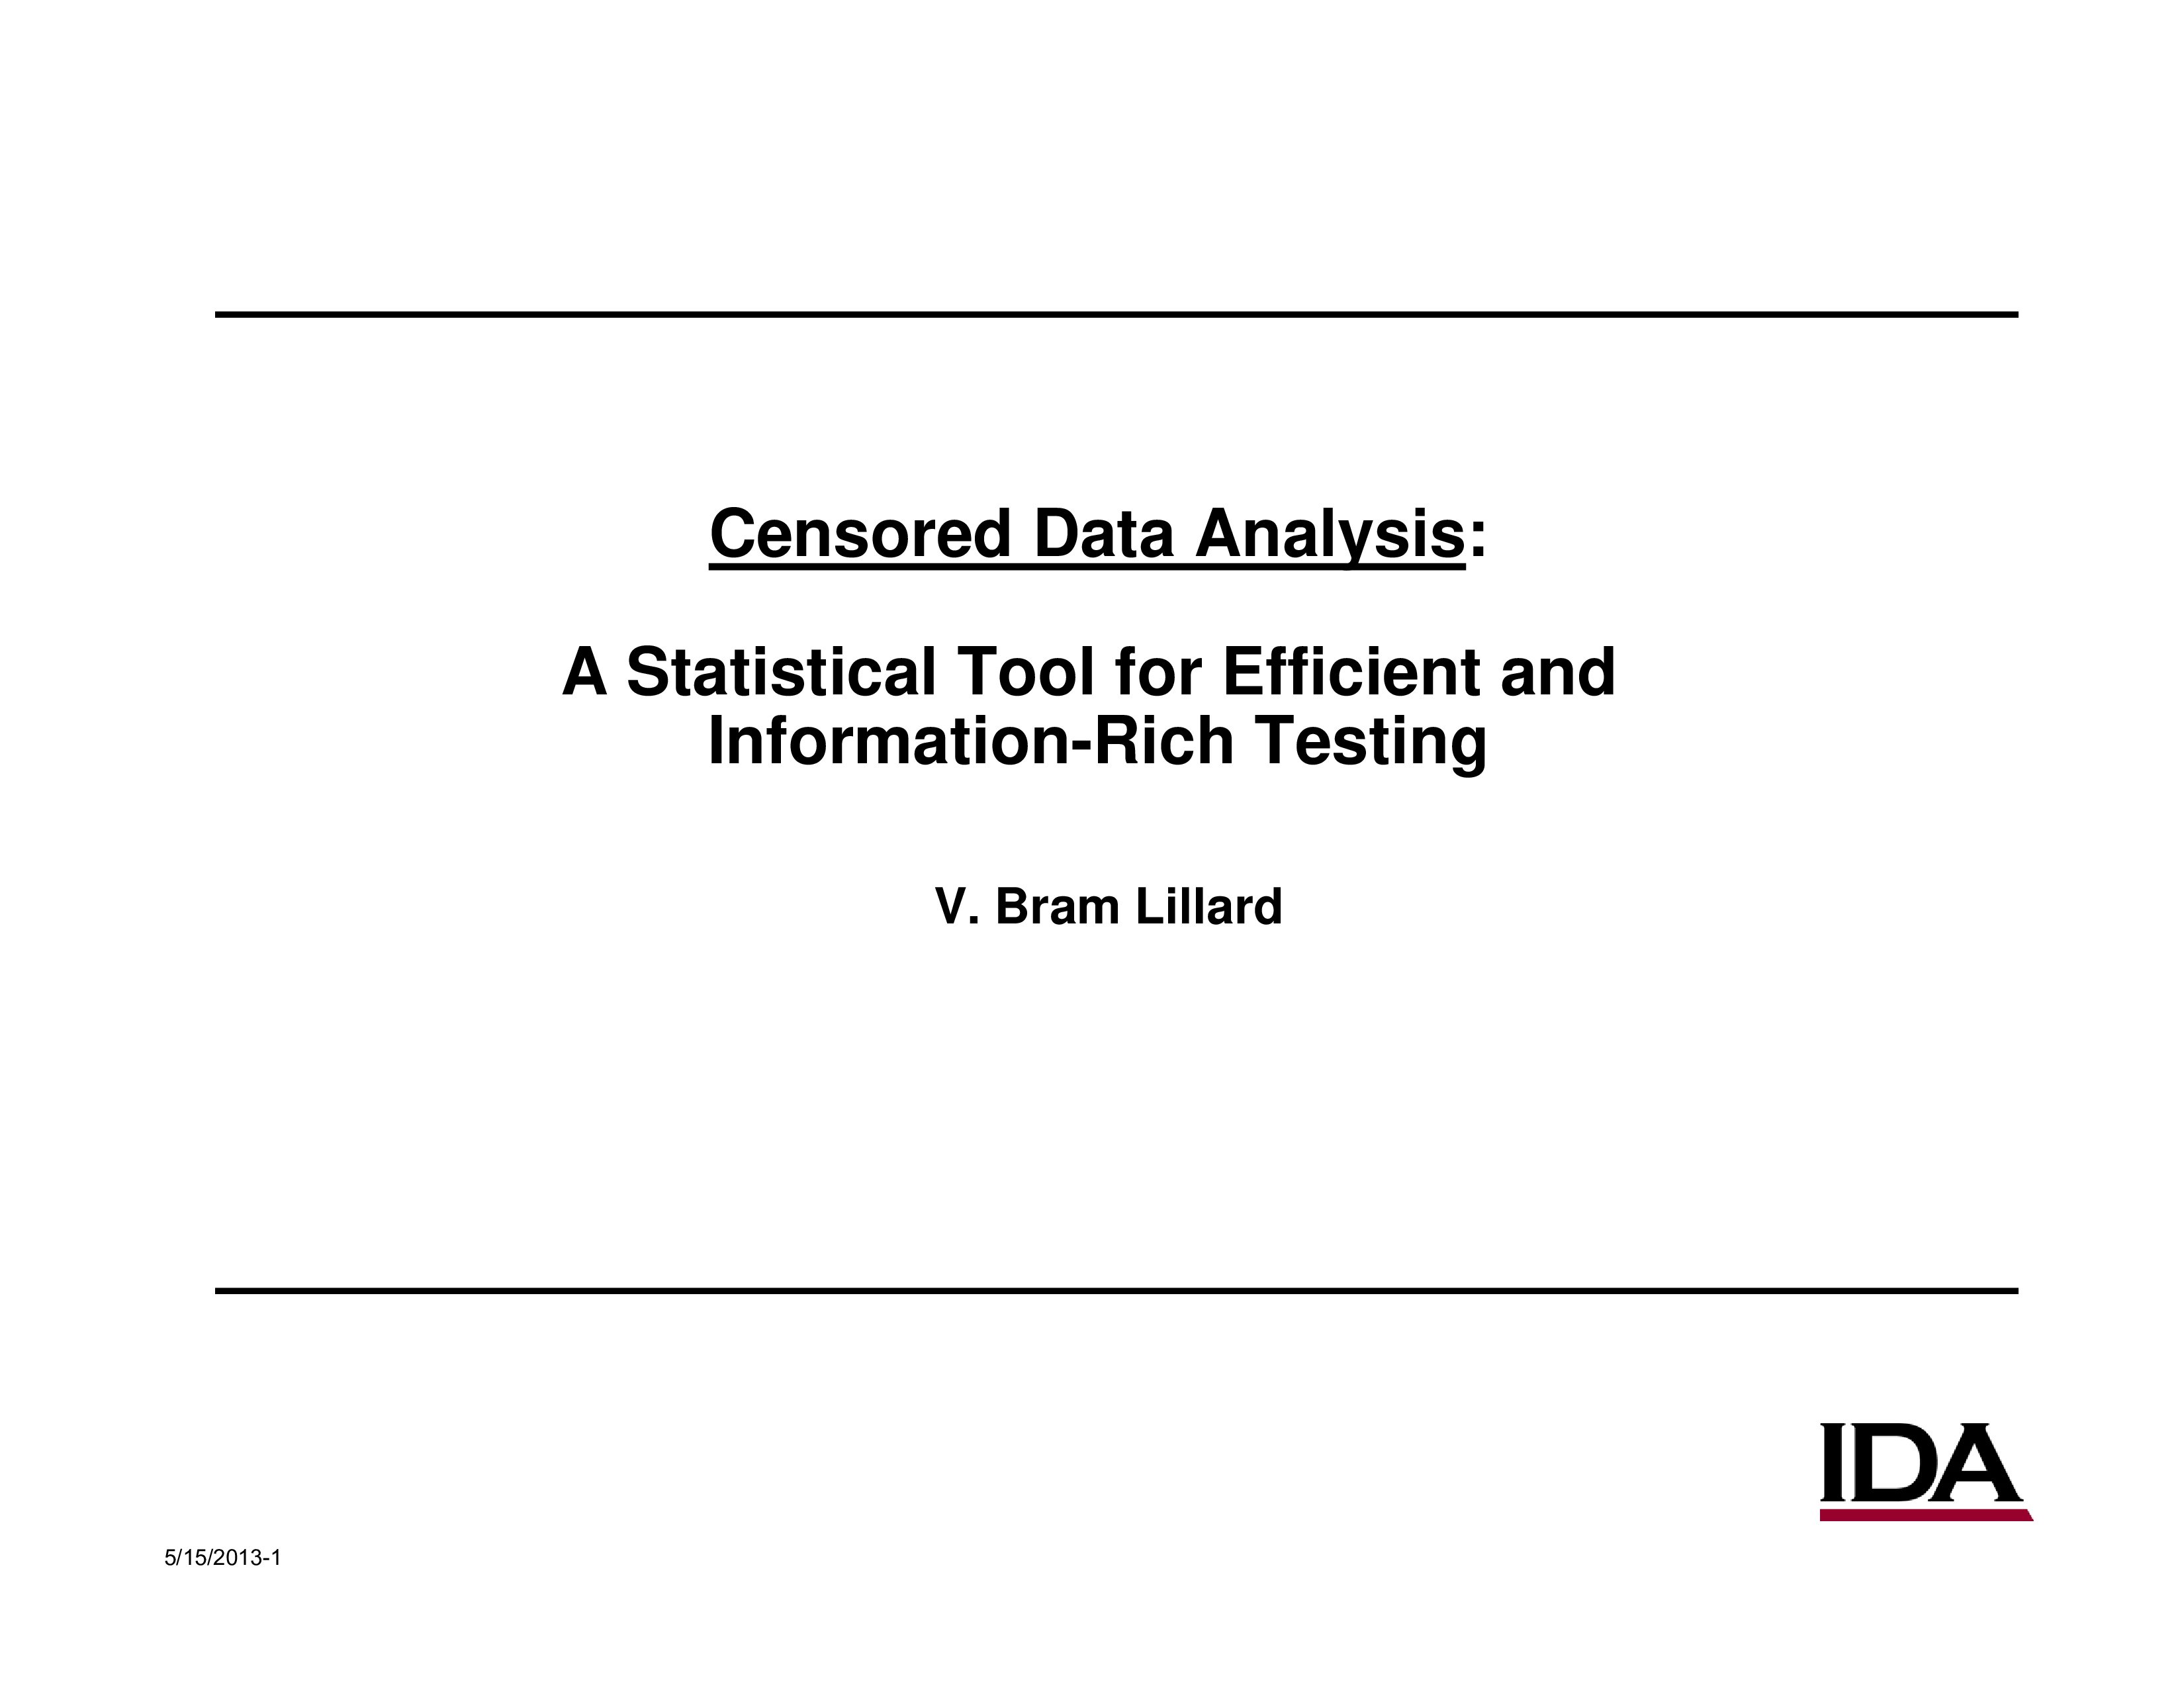 Censored Data Analysis A Statistical Tool for Efficient and Information-Rich Testing